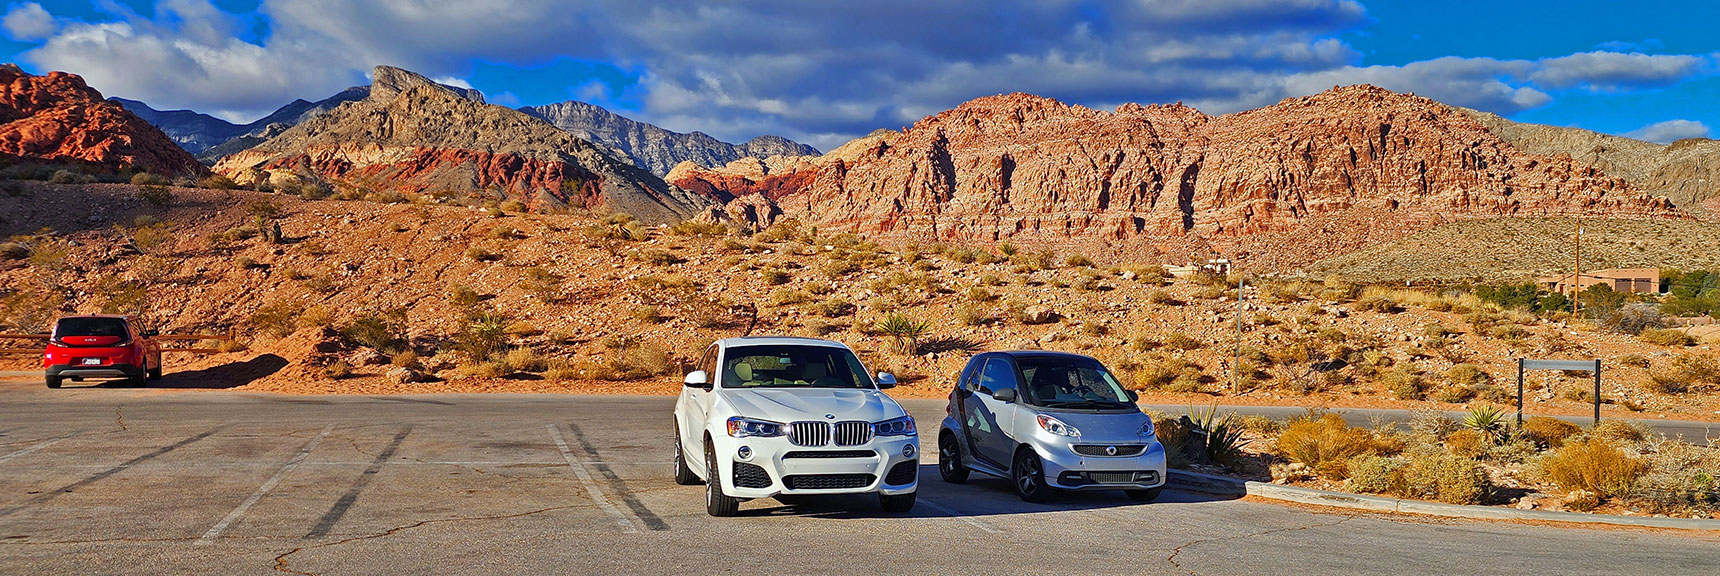 Back at "The Beast" on the Right! | Lower Calico Hills Loop | Calico Basin & Red Rock Canyon, Nevada